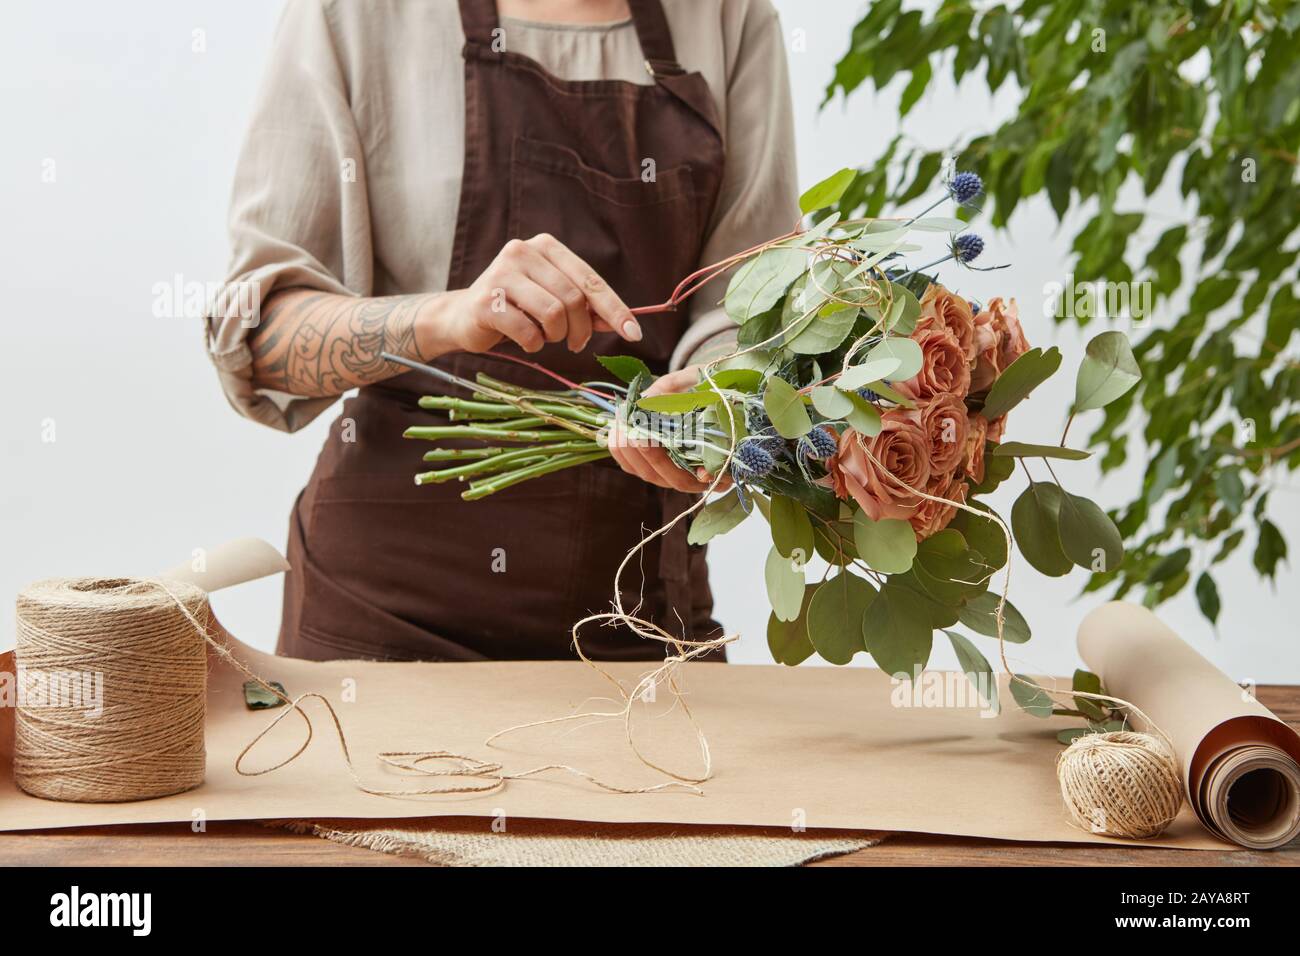 Female florist is decorating beautiful bouquet from fresh natural roses step by step at the table with paper and rope on it. Mot Stock Photo